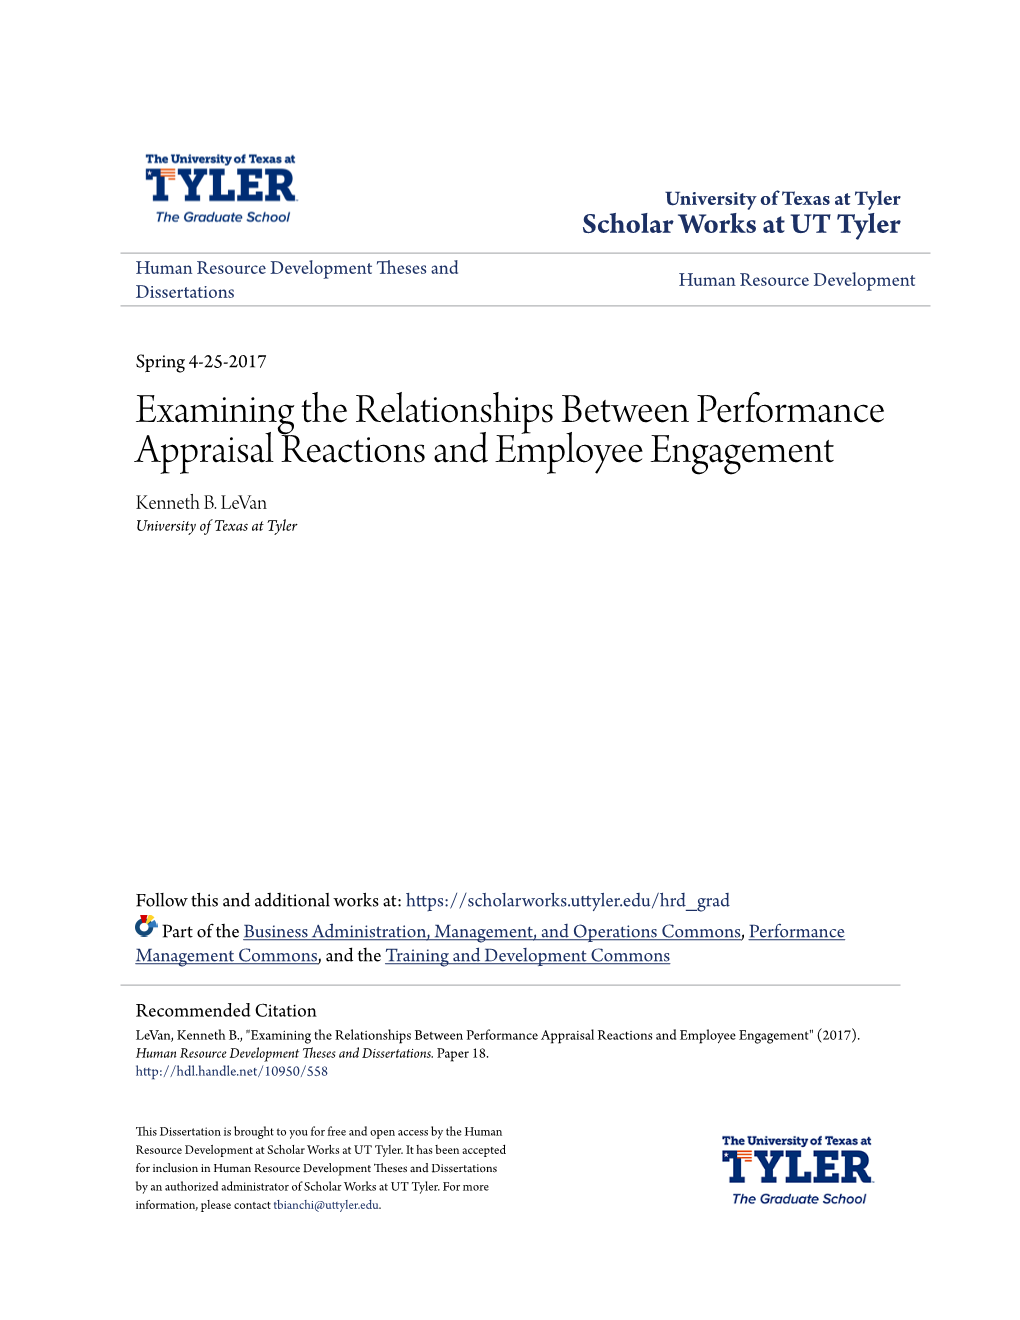 Examining the Relationships Between Performance Appraisal Reactions and Employee Engagement Kenneth B